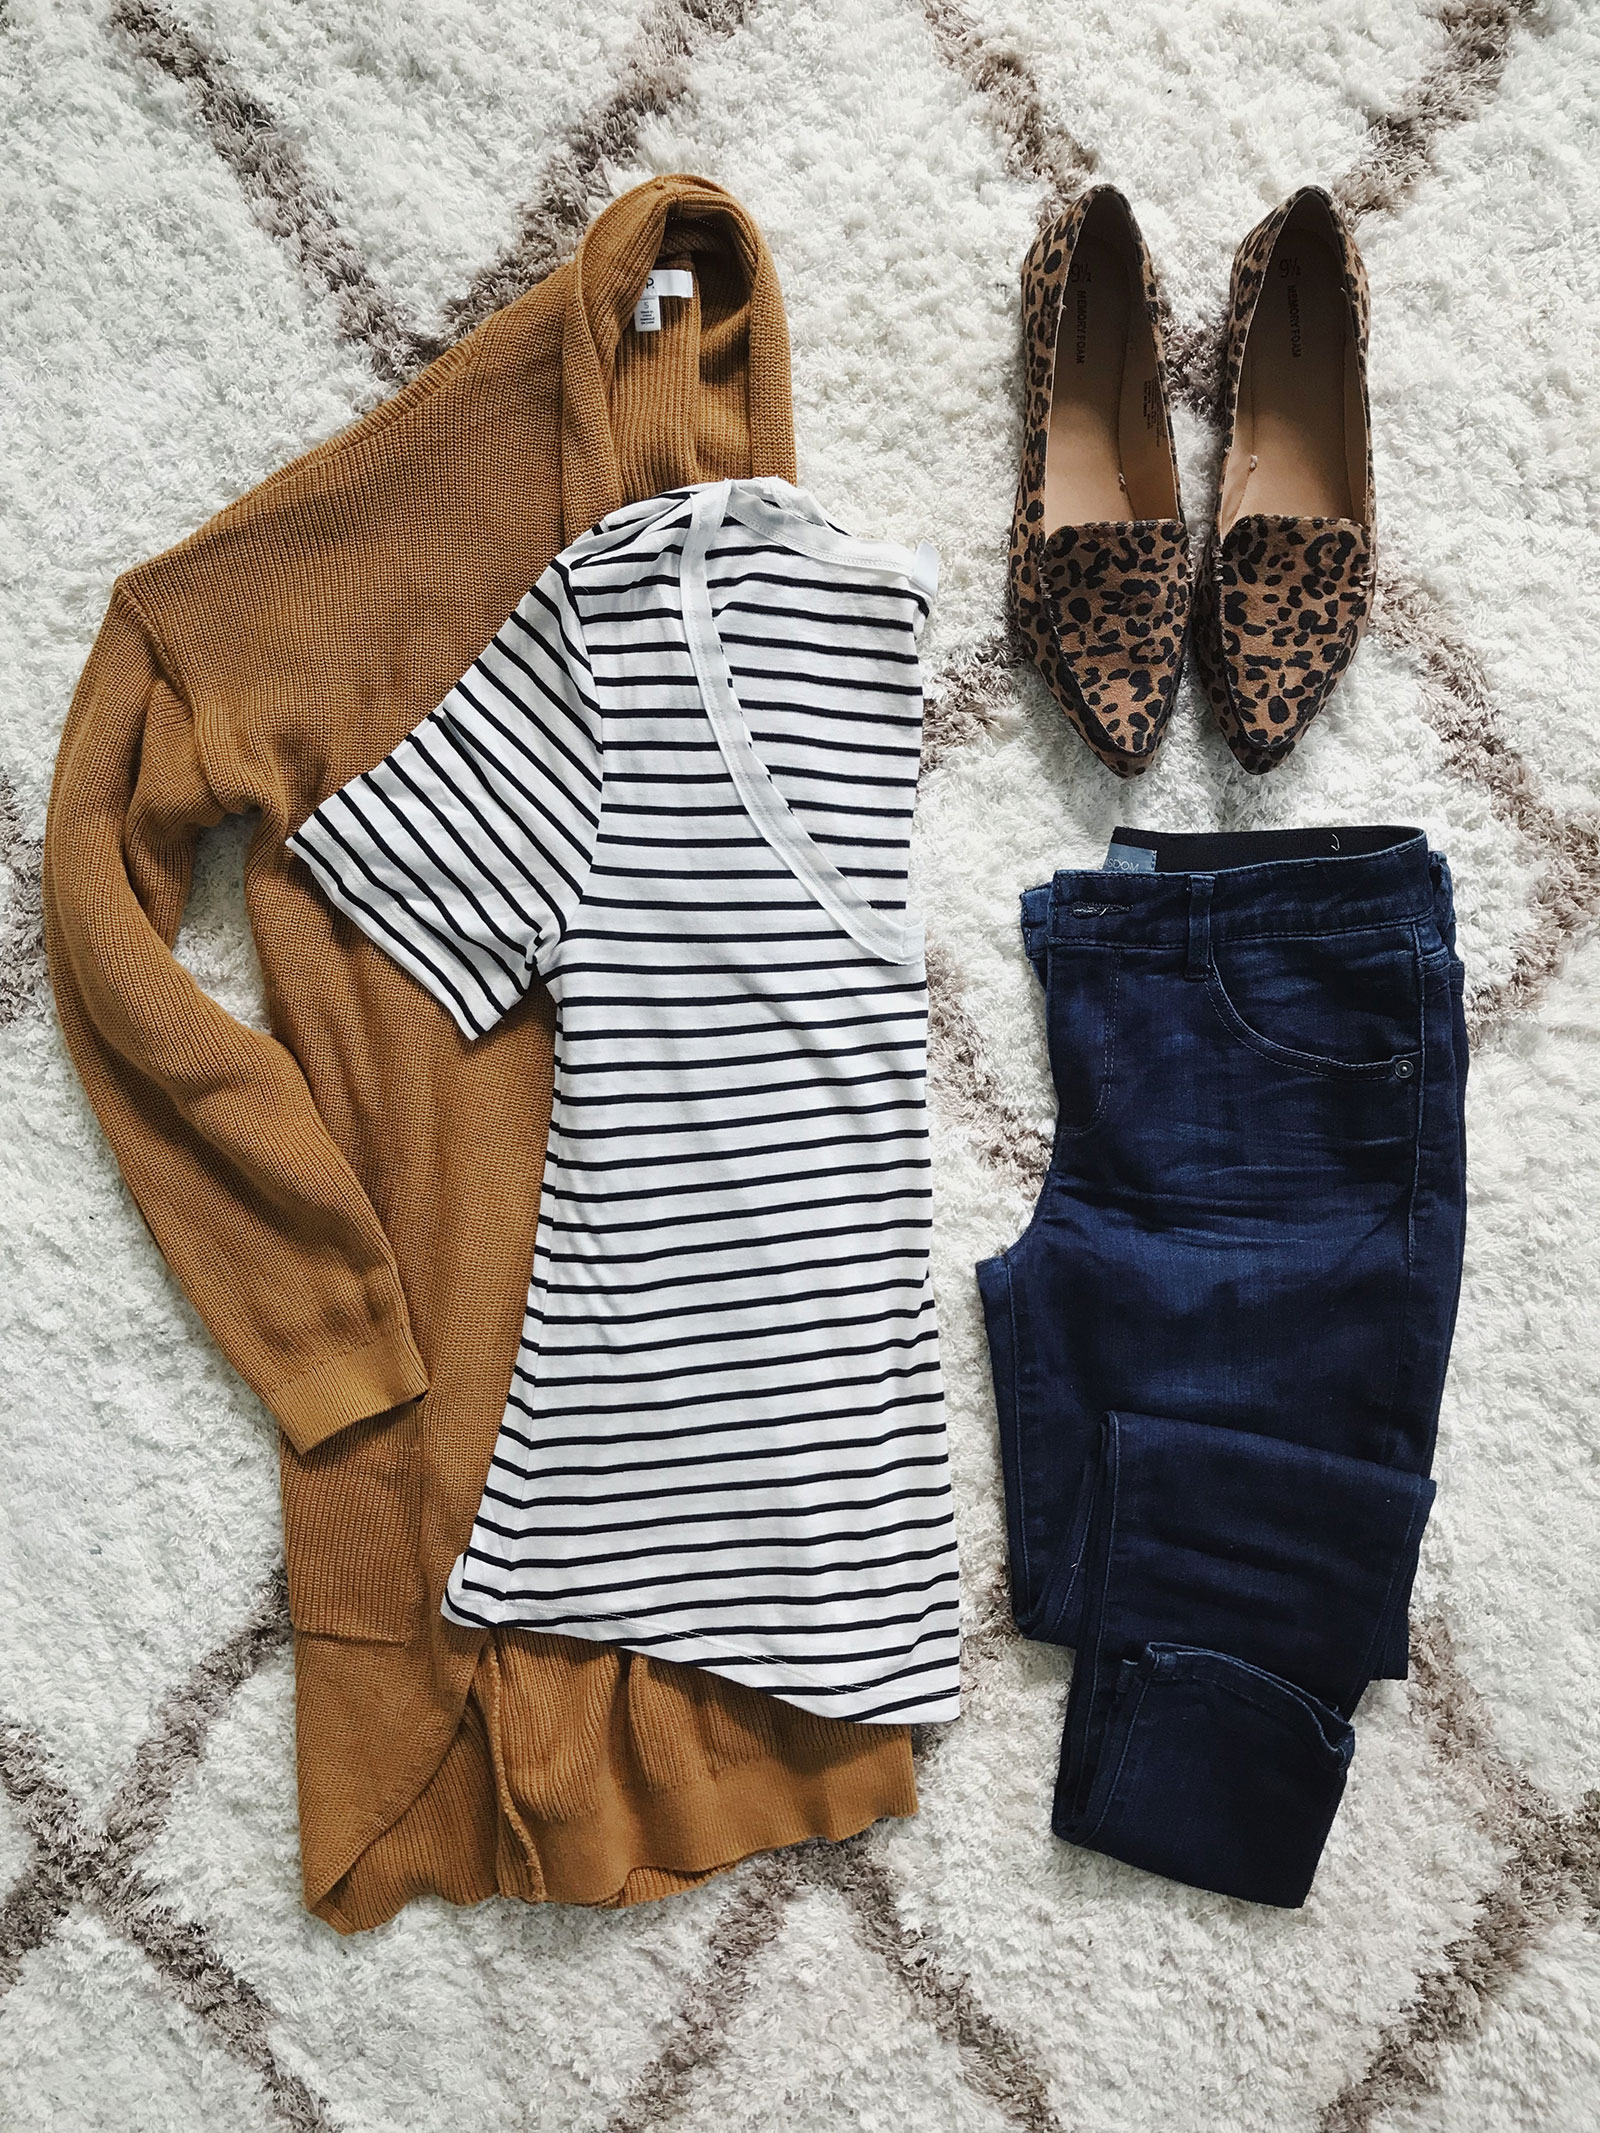 Fall outfit idea with camel cardigan, striped tee and leopard flats